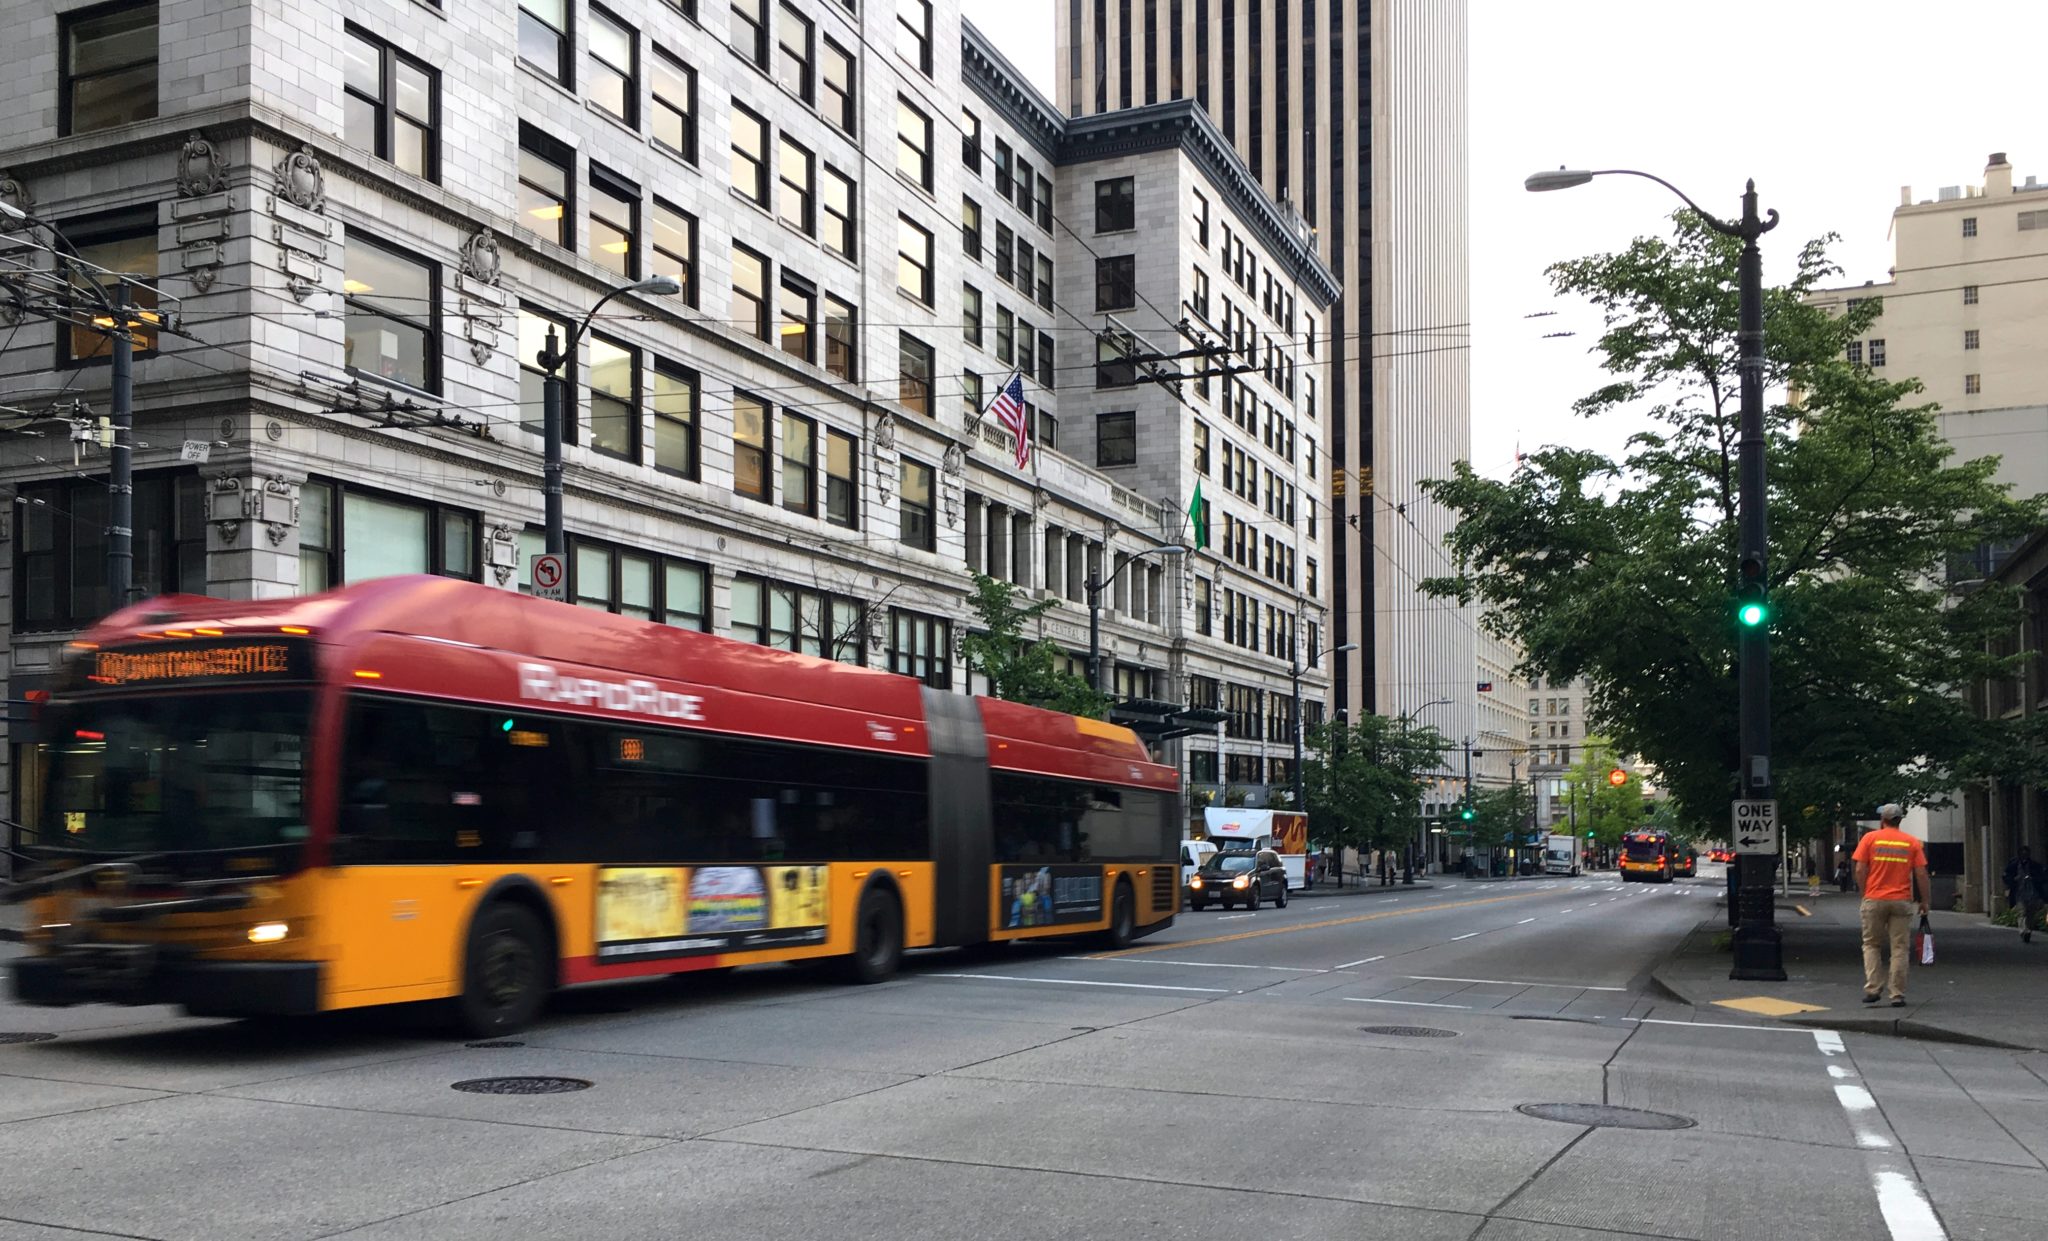 A RapidRide bus travels through downtown Seattle, along 3rd Ave. Buildings and other vehicles, as well as one person walking and wearing an orange shirt, are visible in the photo, along with several trees.